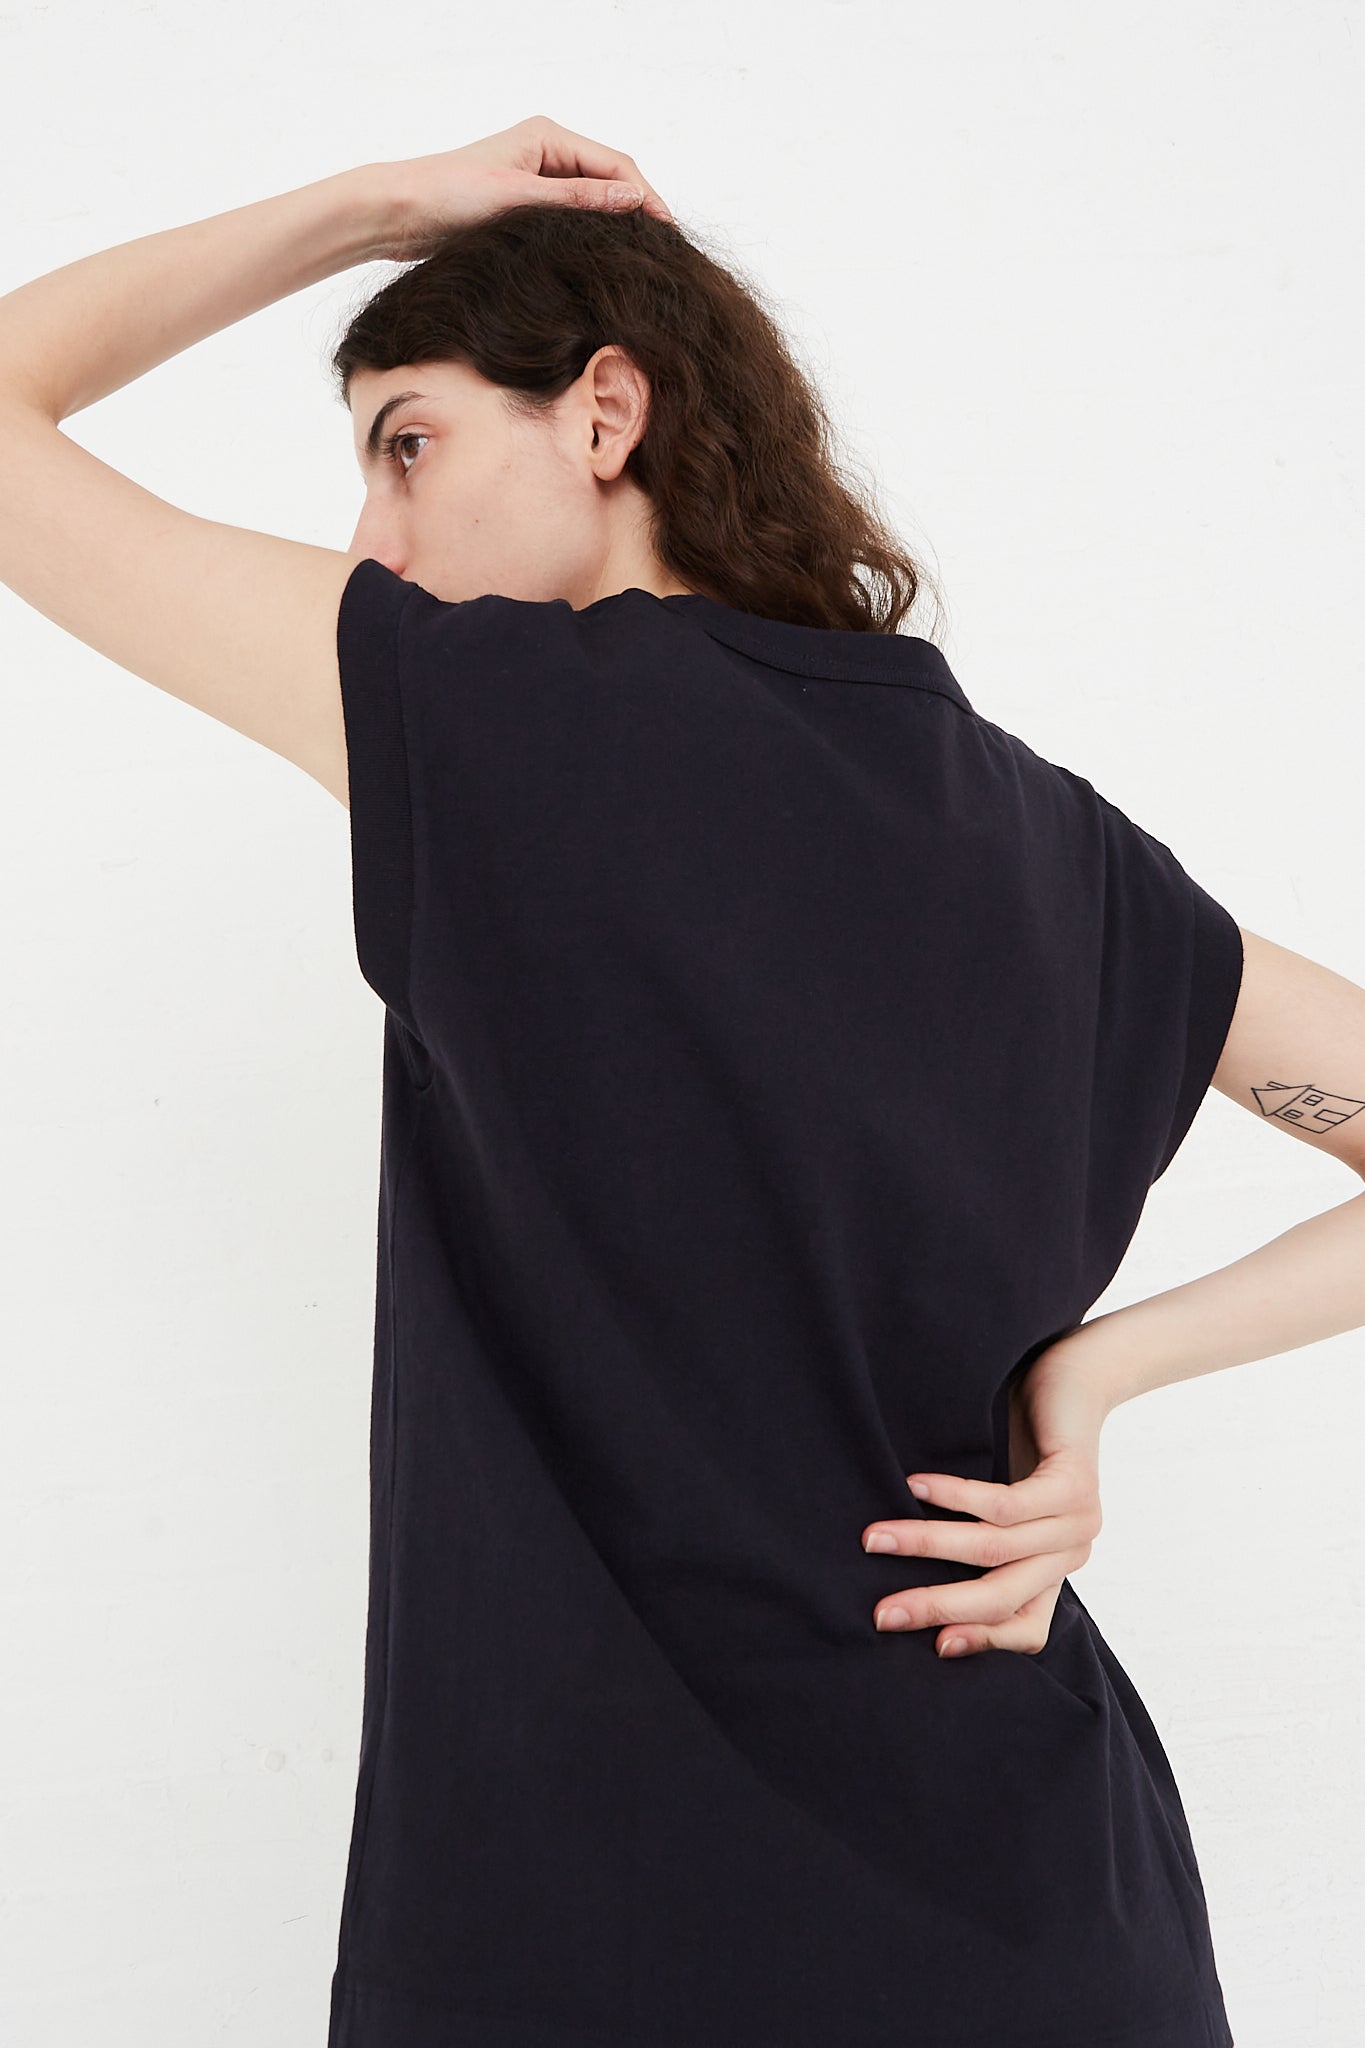 The back view of a model wearing a navy B Sides Cotton Pocket Tank in Overdyed Marine t-shirt.